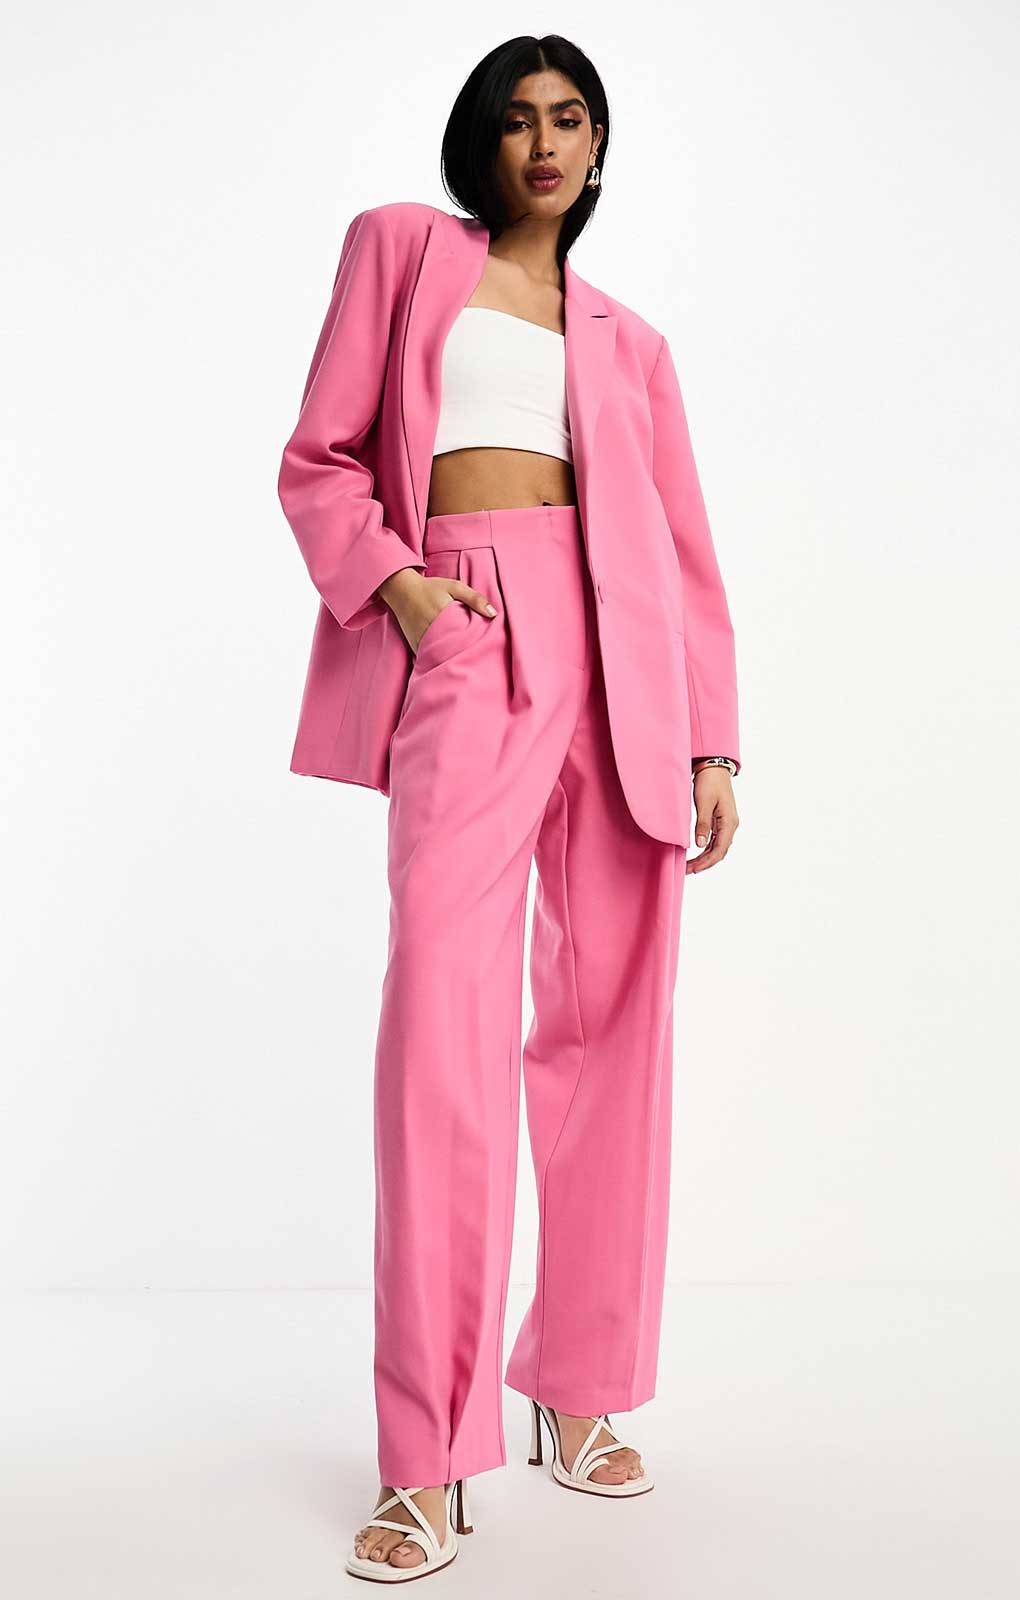 ASOS EDITION oversized blazer and wide leg pants set in stone